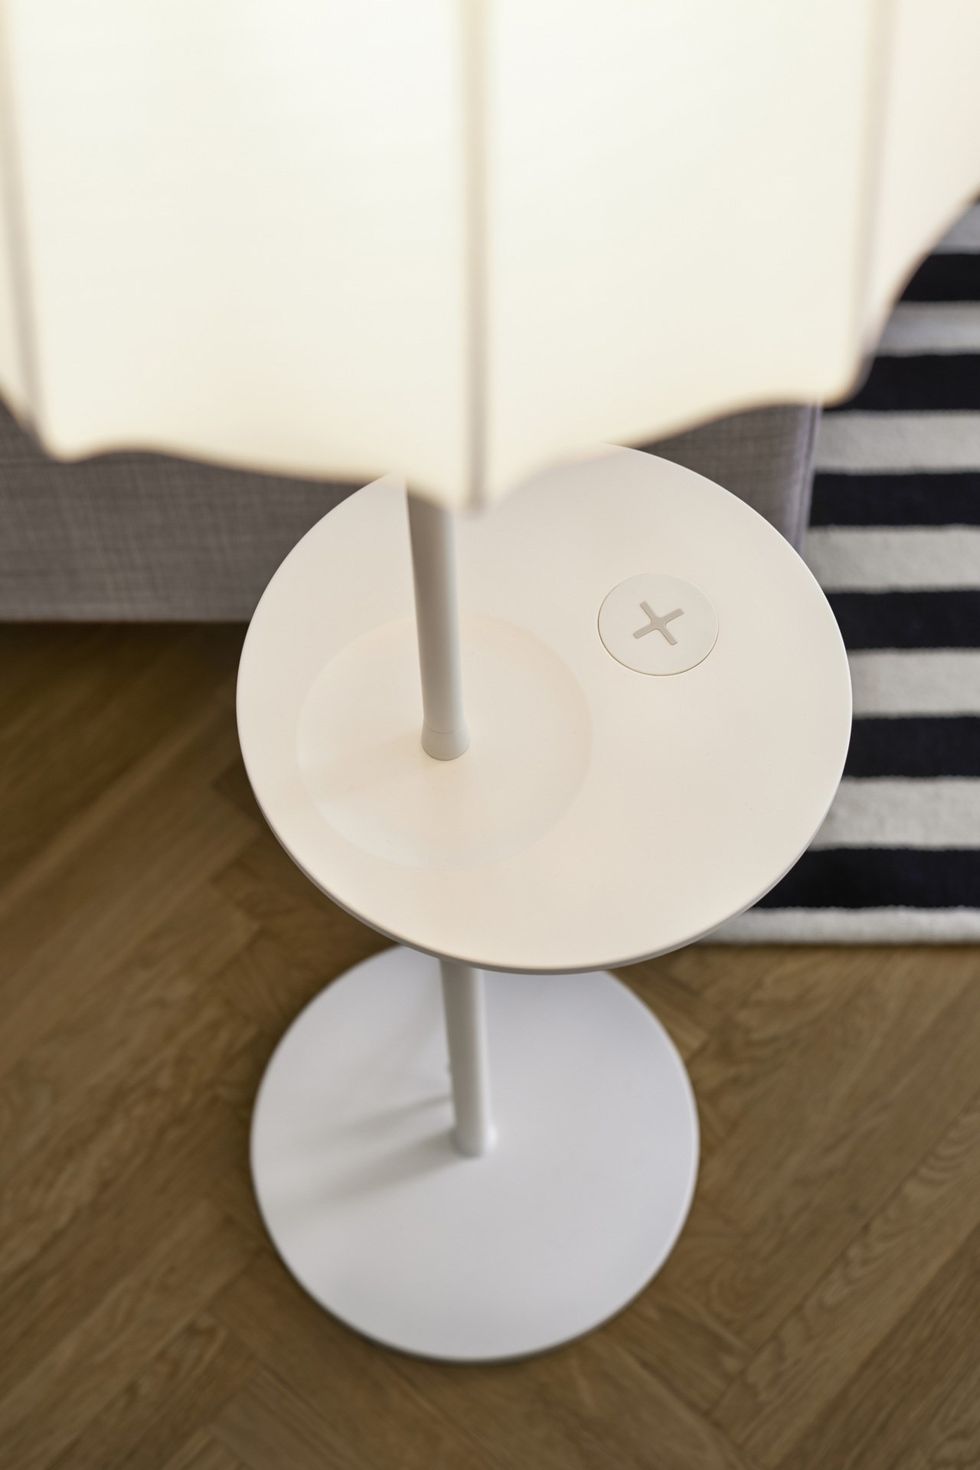 The new phone charging range from Ikea is genius